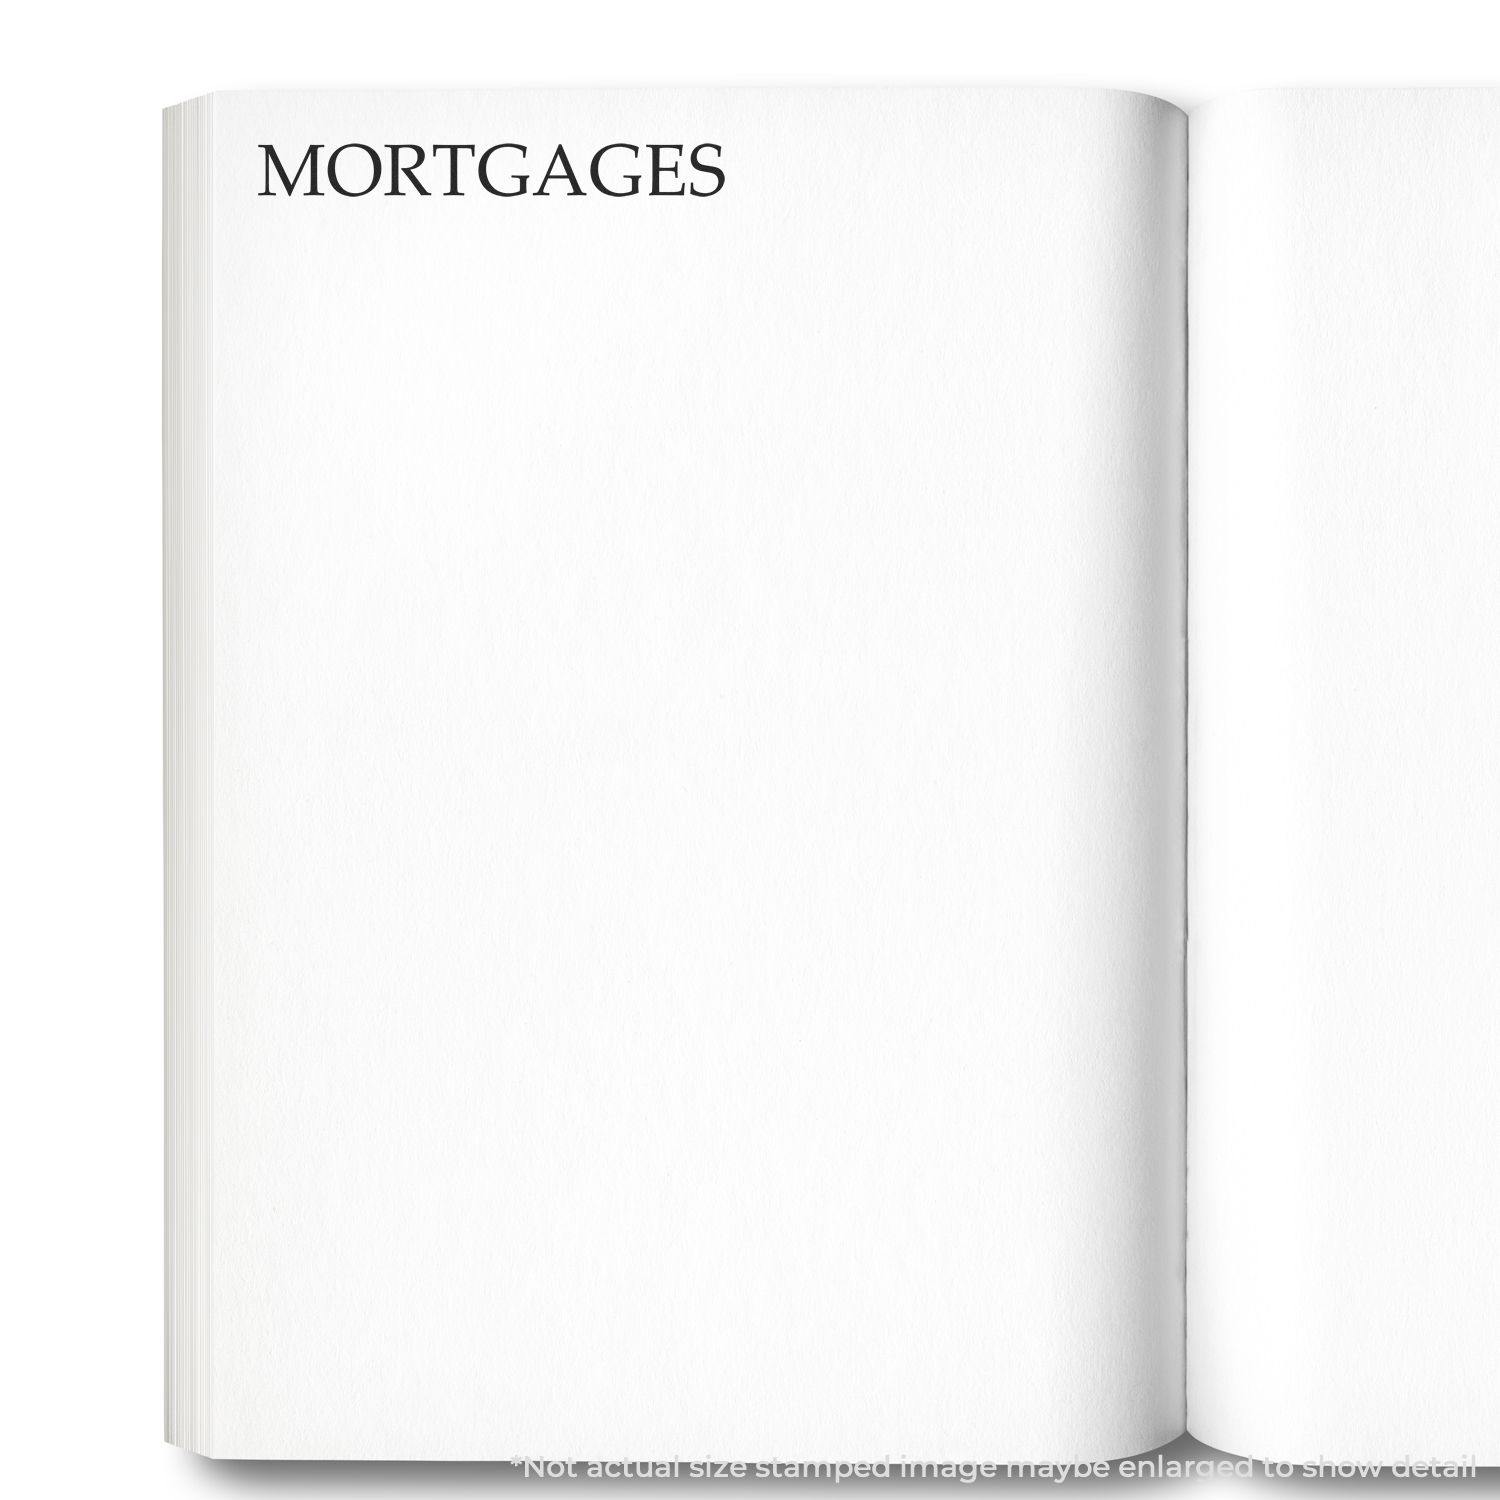 A stock office rubber stamp with a stamped image showing how the text "MORTGAGES" is displayed after stamping.